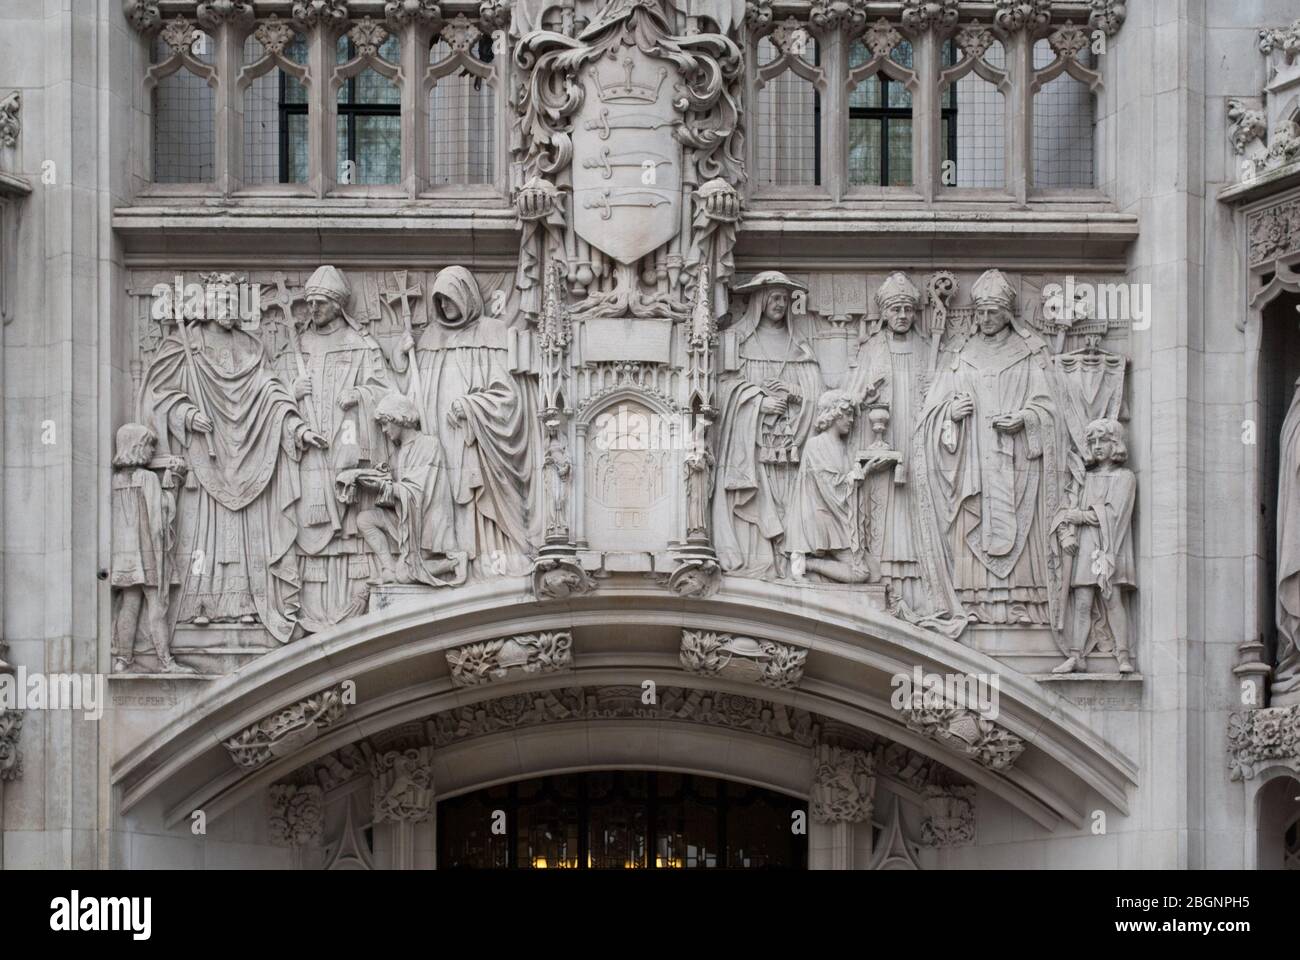 Stone Portland Stone Neo Gothic Architecture The Supreme Court, Little George St, Westminster, London SW1P 3BD von James Gibson Stockfoto